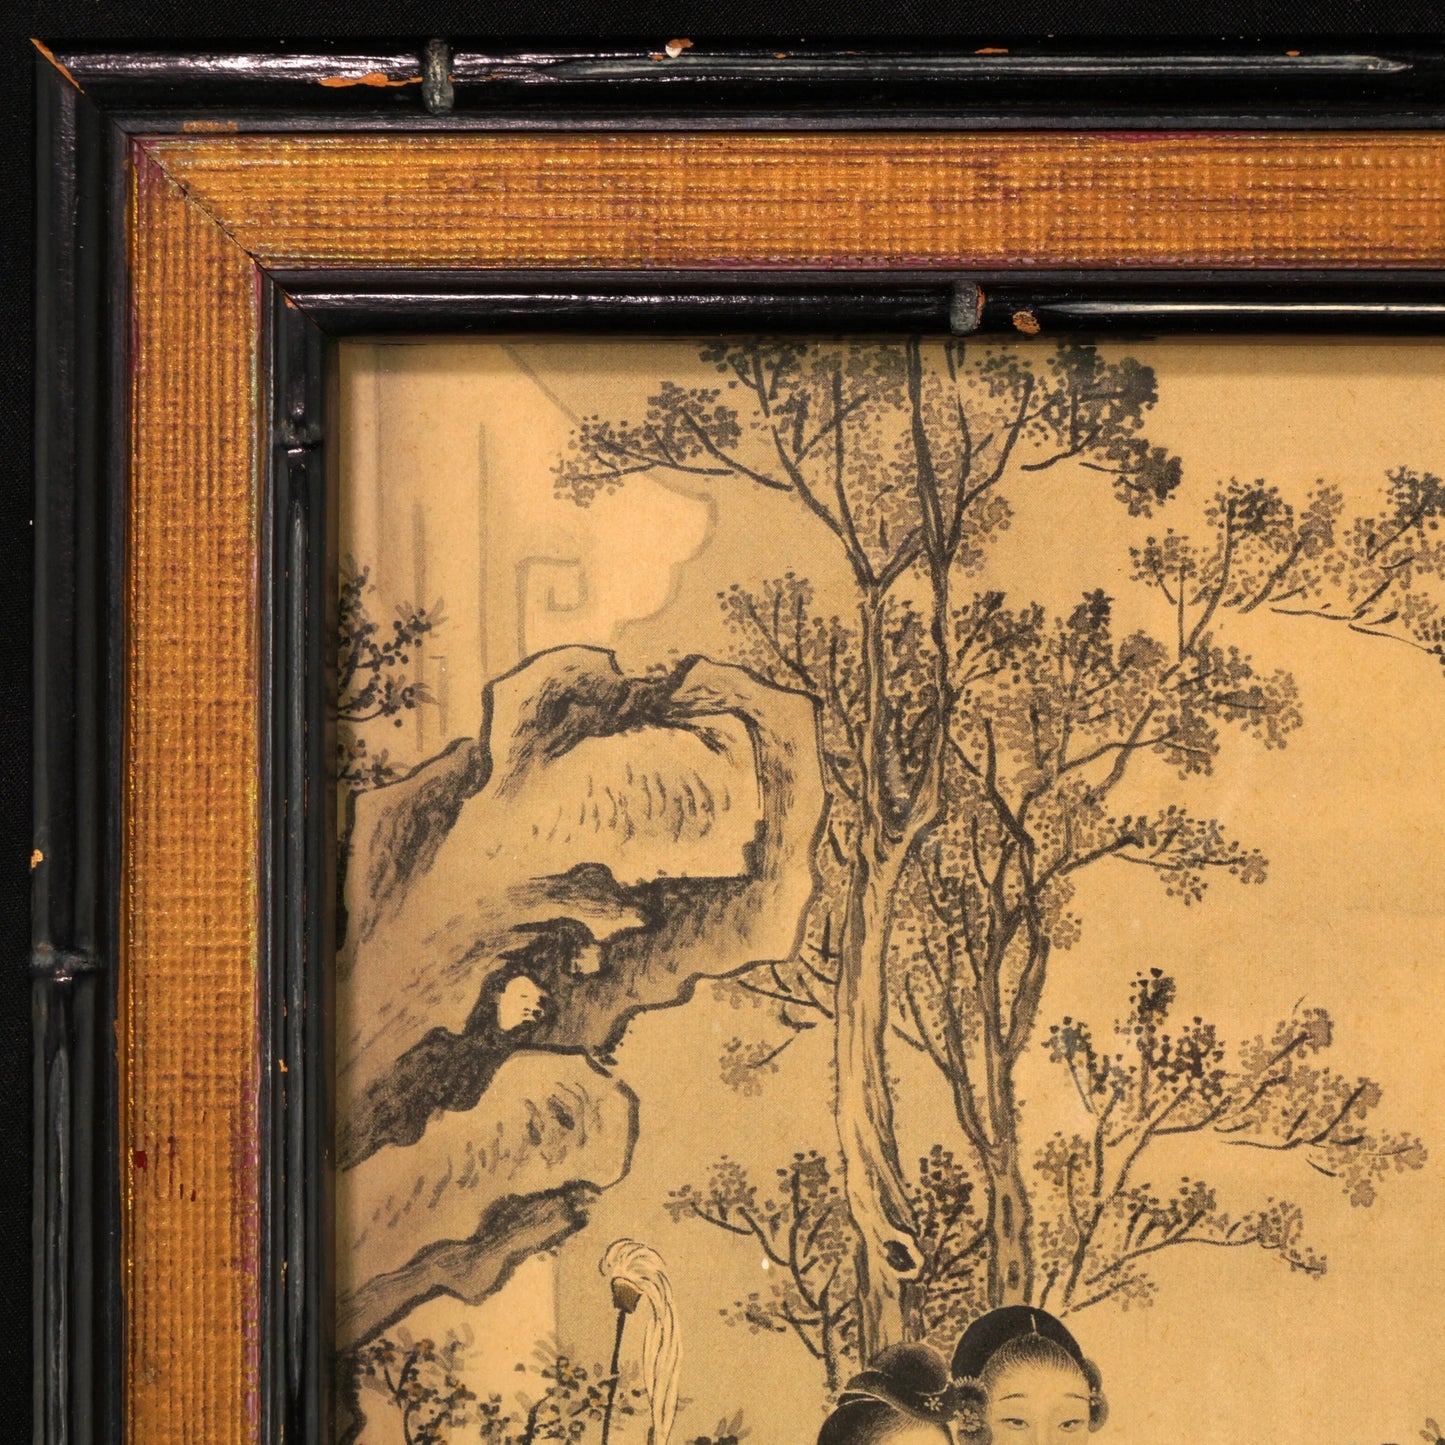 Framed Chinese Print of Beauties in a Garden Circa 1920 - Bear and Raven Antiques